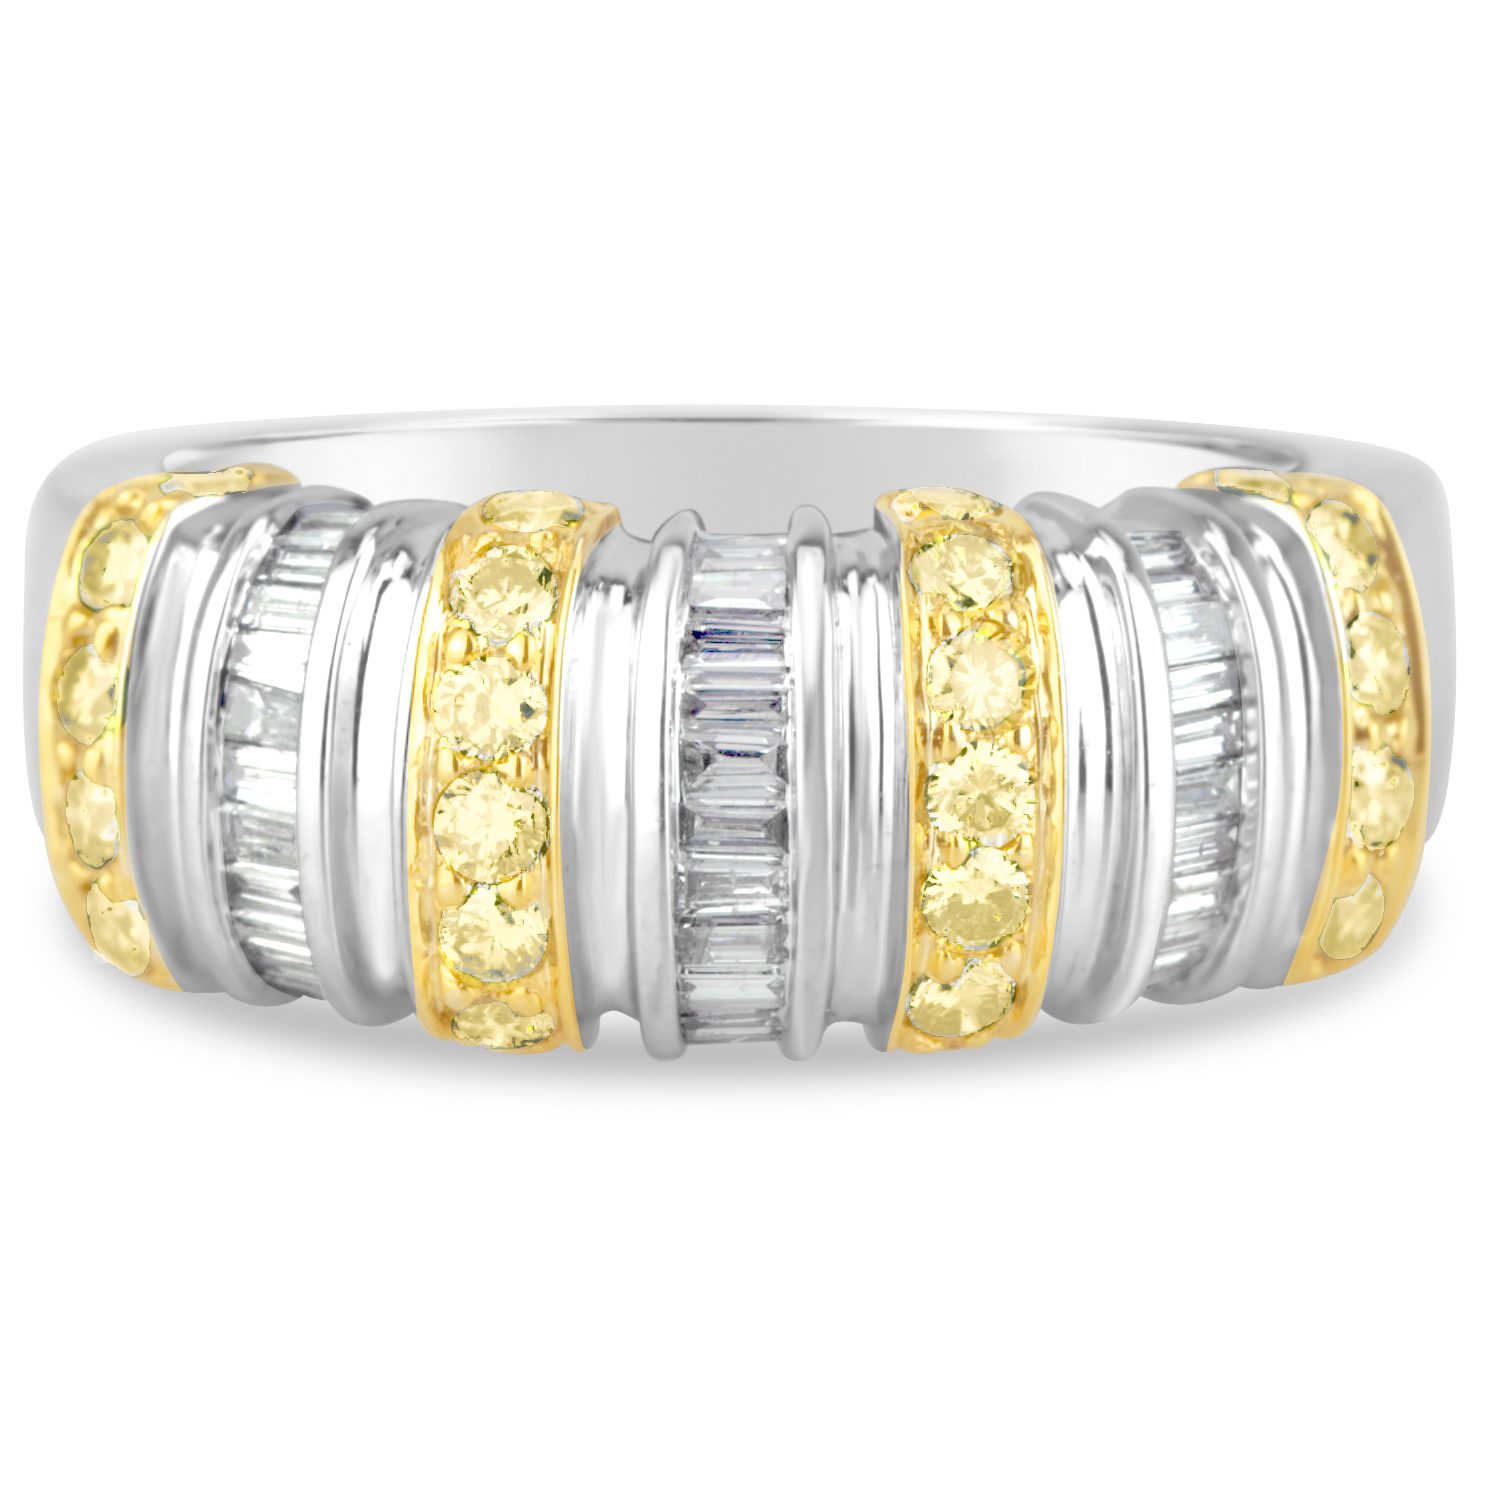 yellow and white diamonds with round and baguette cuts in yellow and white gold anniversary band